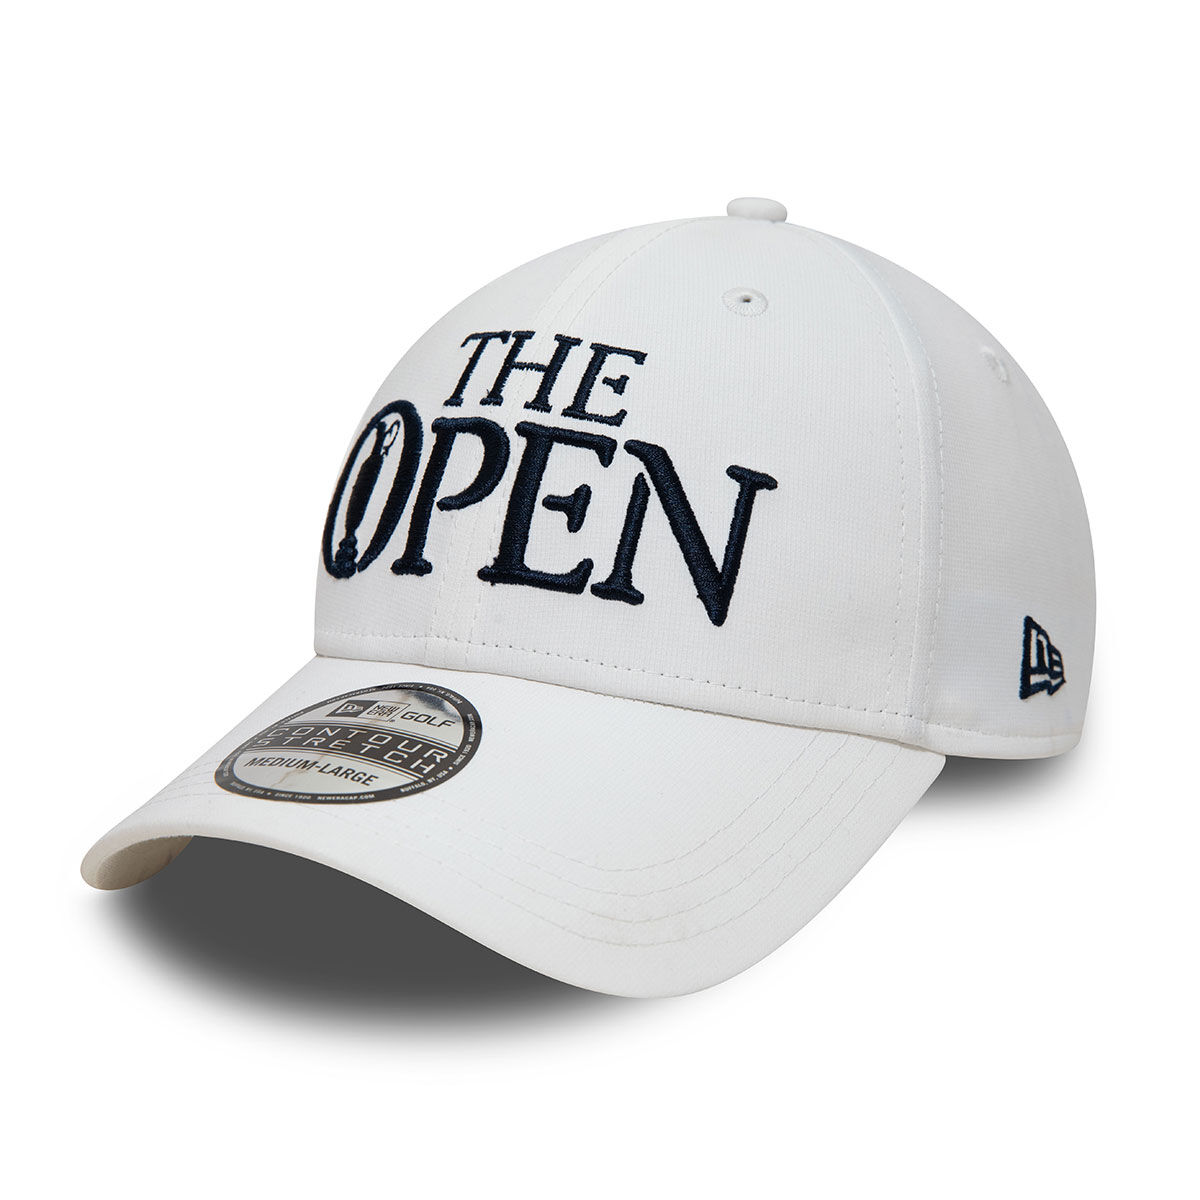 New Era Mens White and Black Comfortable Logo Print Quill Tech 39Thirty The Open Golf Cap, Size: Small/Medium | American Golf